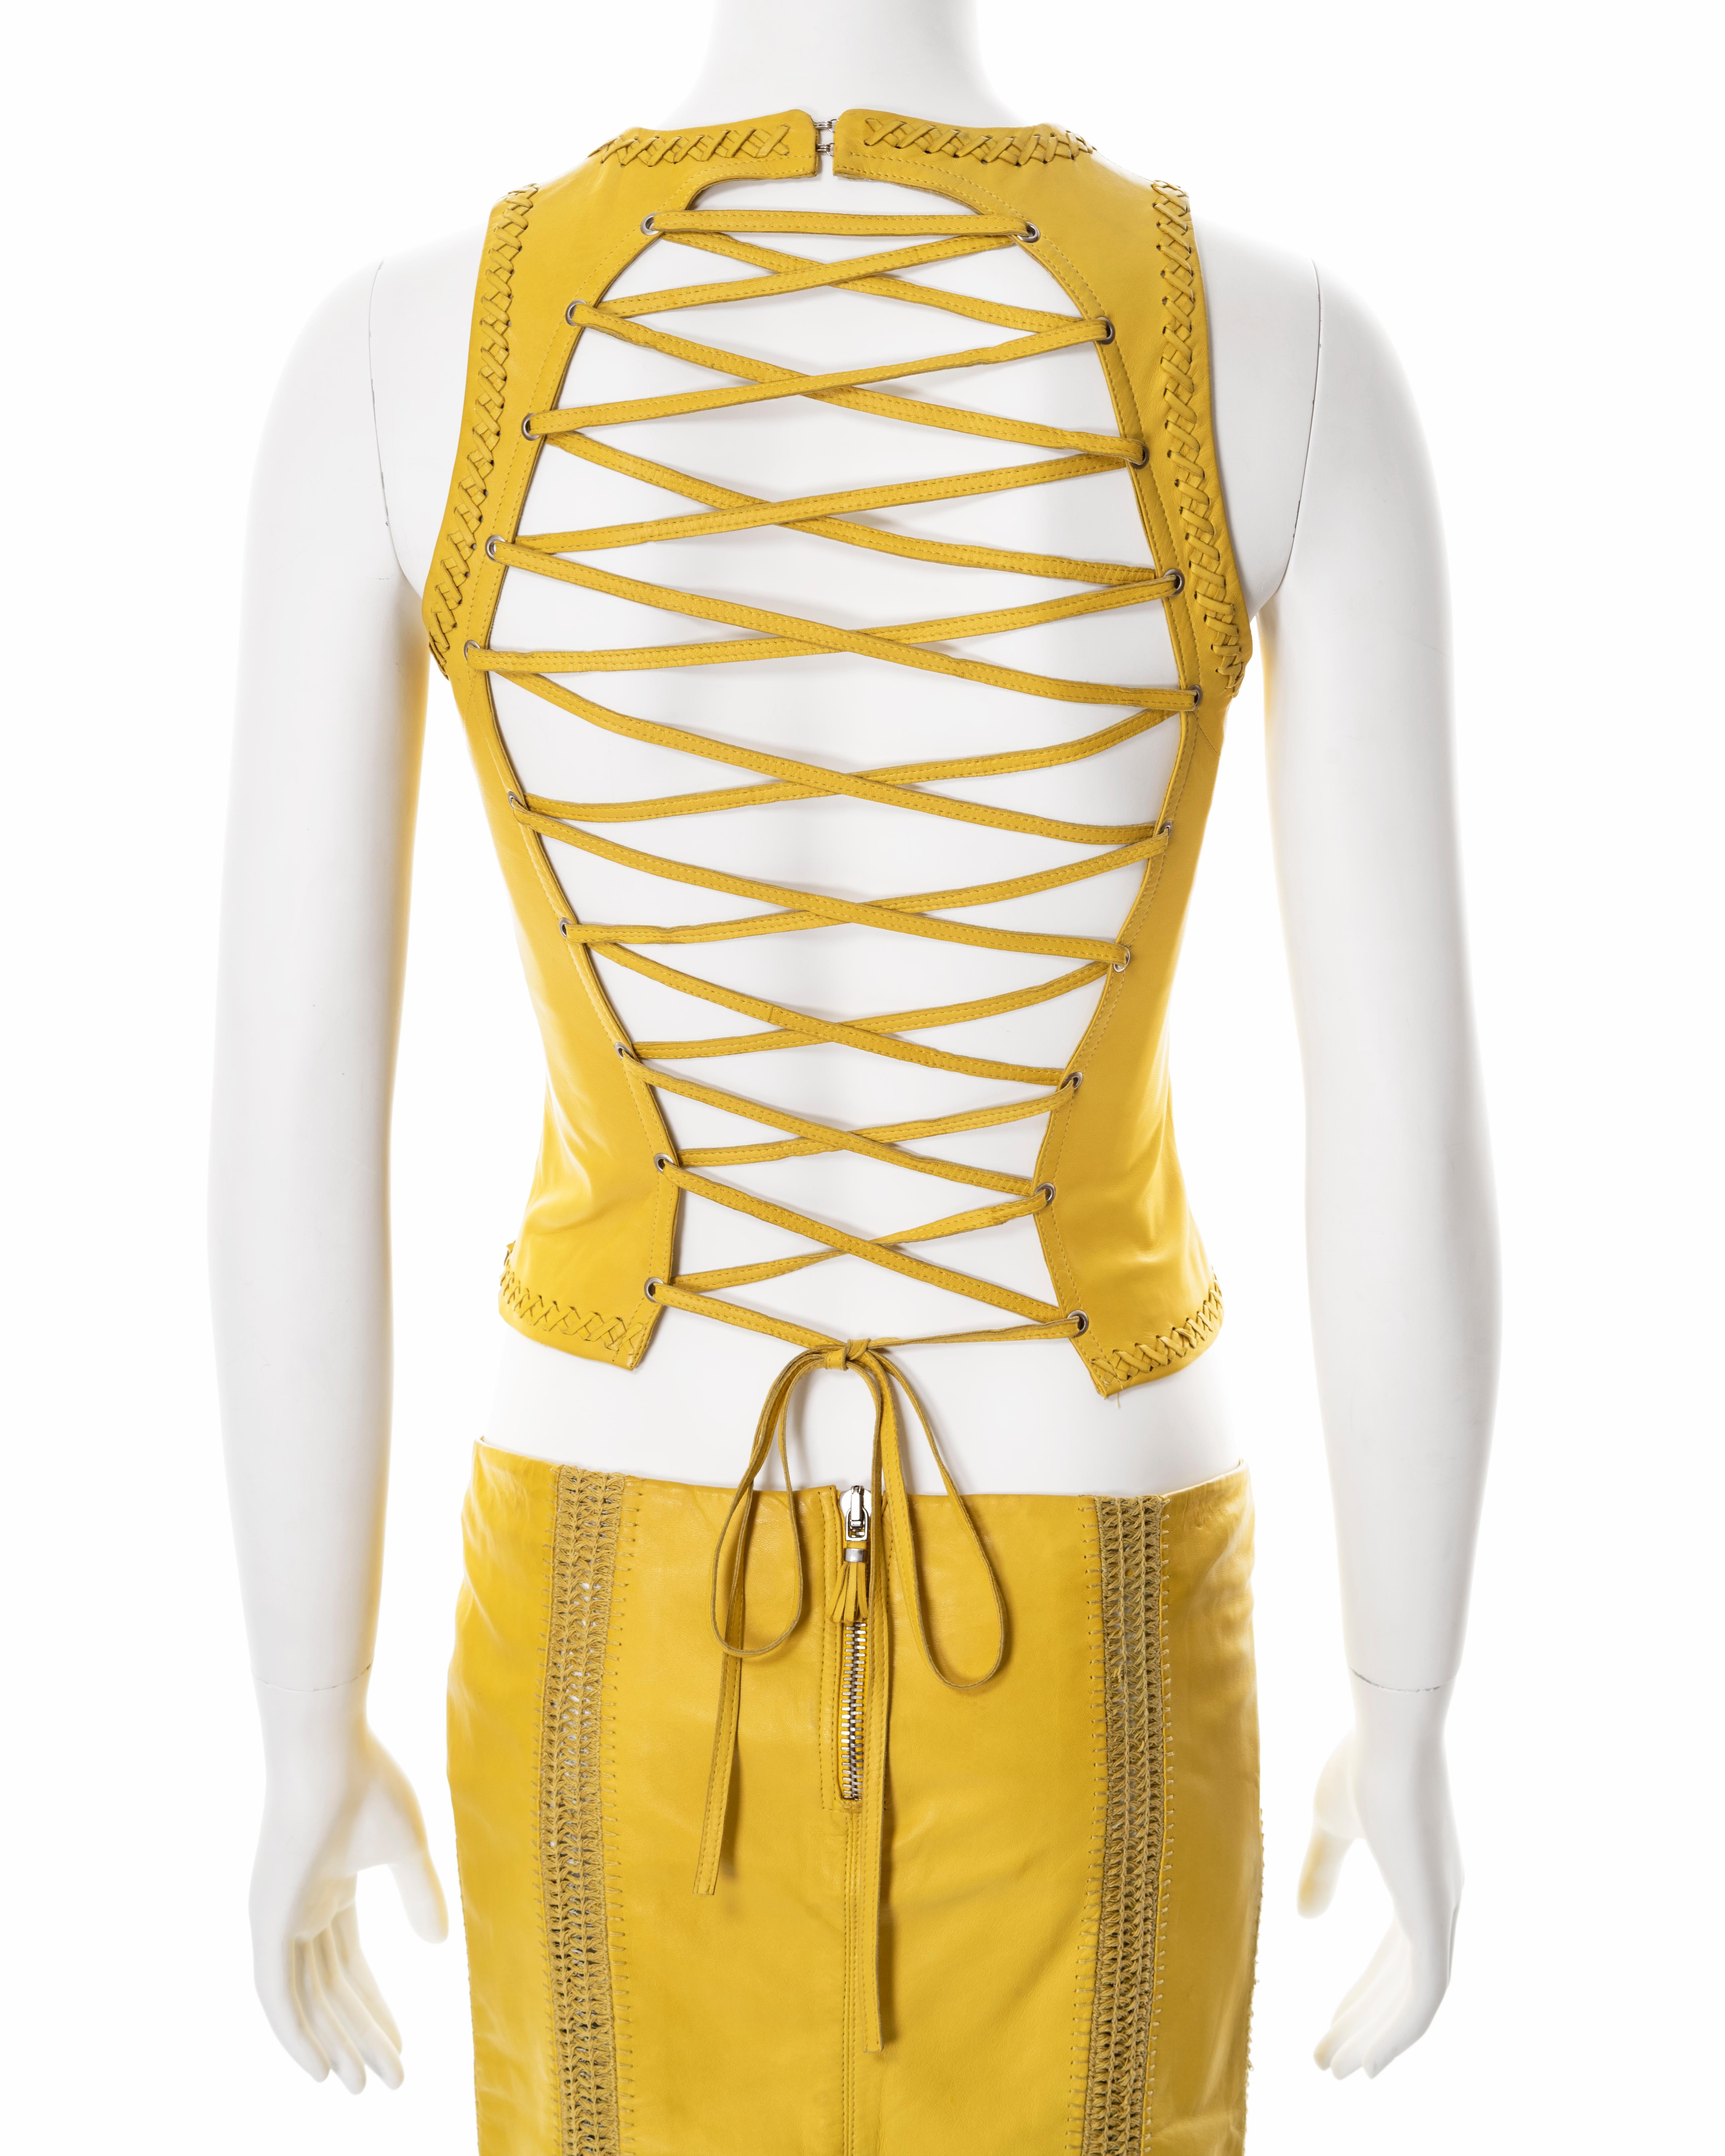 Gianni Versace yellow lambskin leather top and skirt, ss 2003 For Sale 2